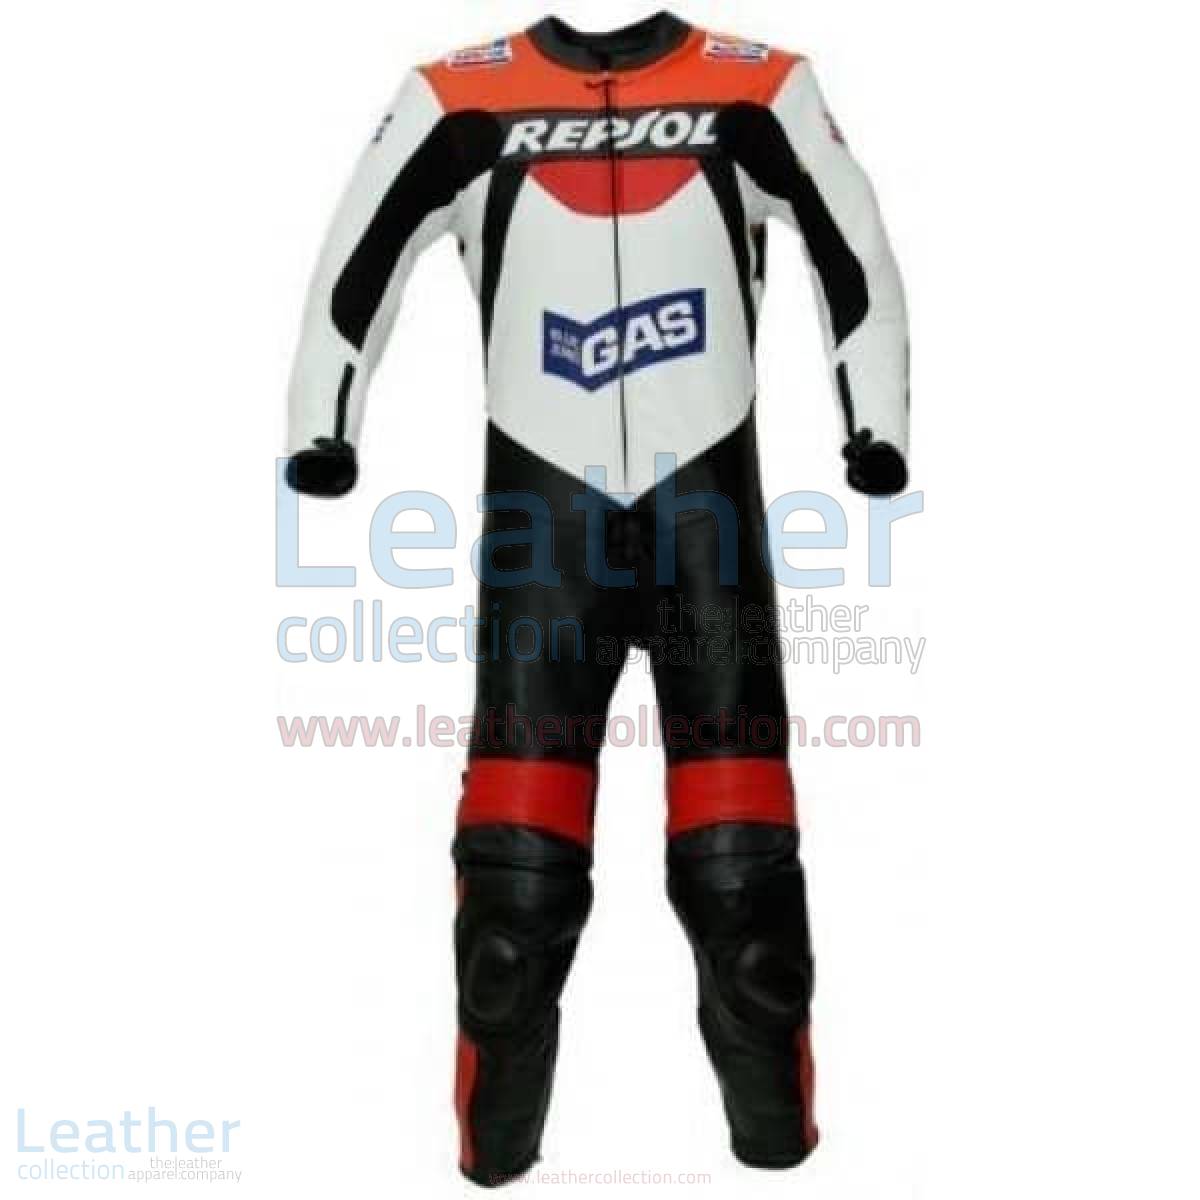 Repsol Gas Racing Leather Suit